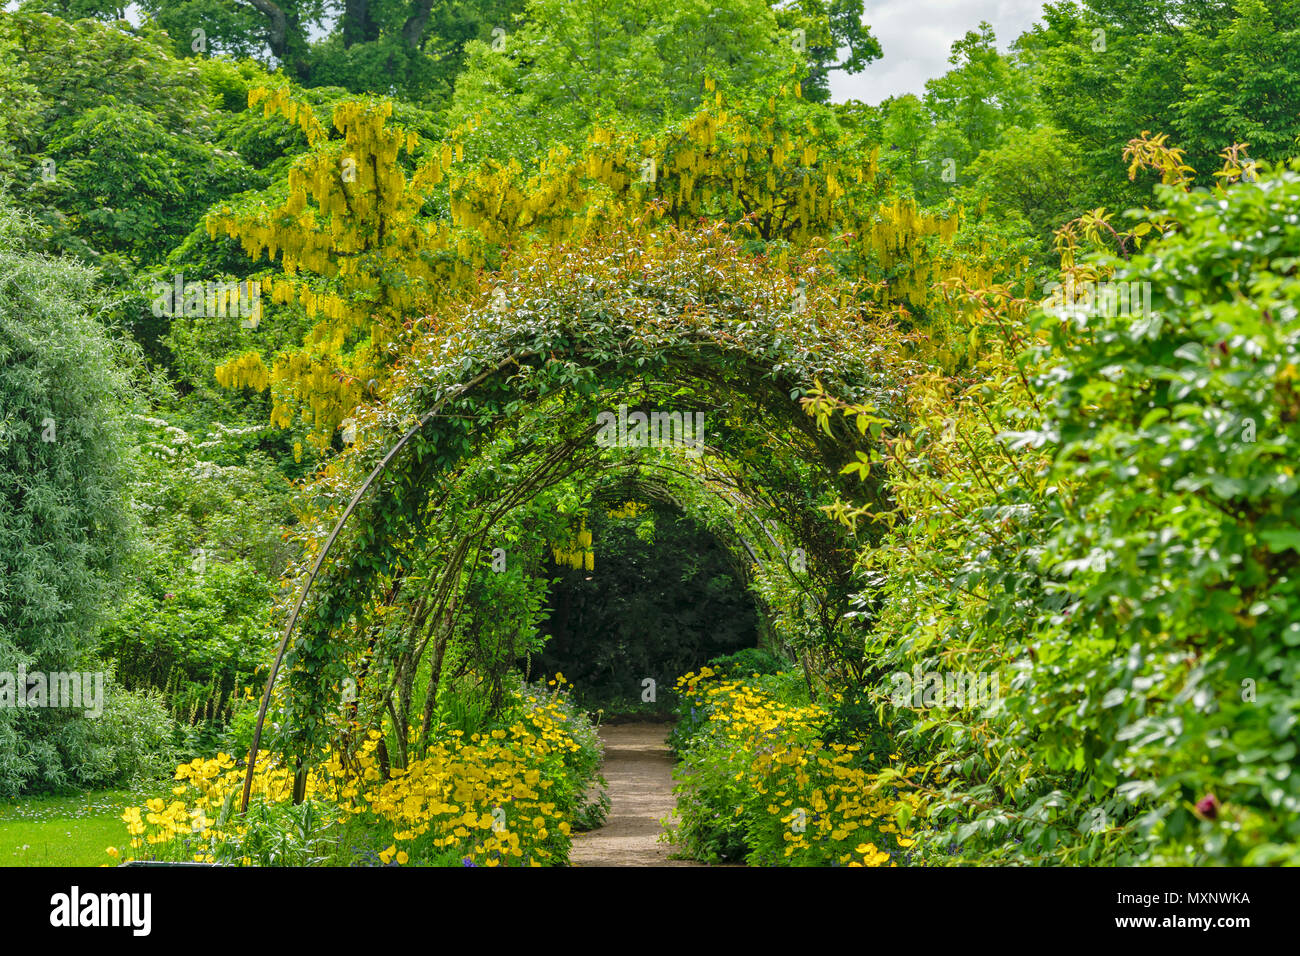 CAWDOR CASTLE NAIRN SCOTLAND GARDEN ARCHWAY LINED BY FLOWERS WITH LABURNUM TREES IN THE BACKGROUND Stock Photo